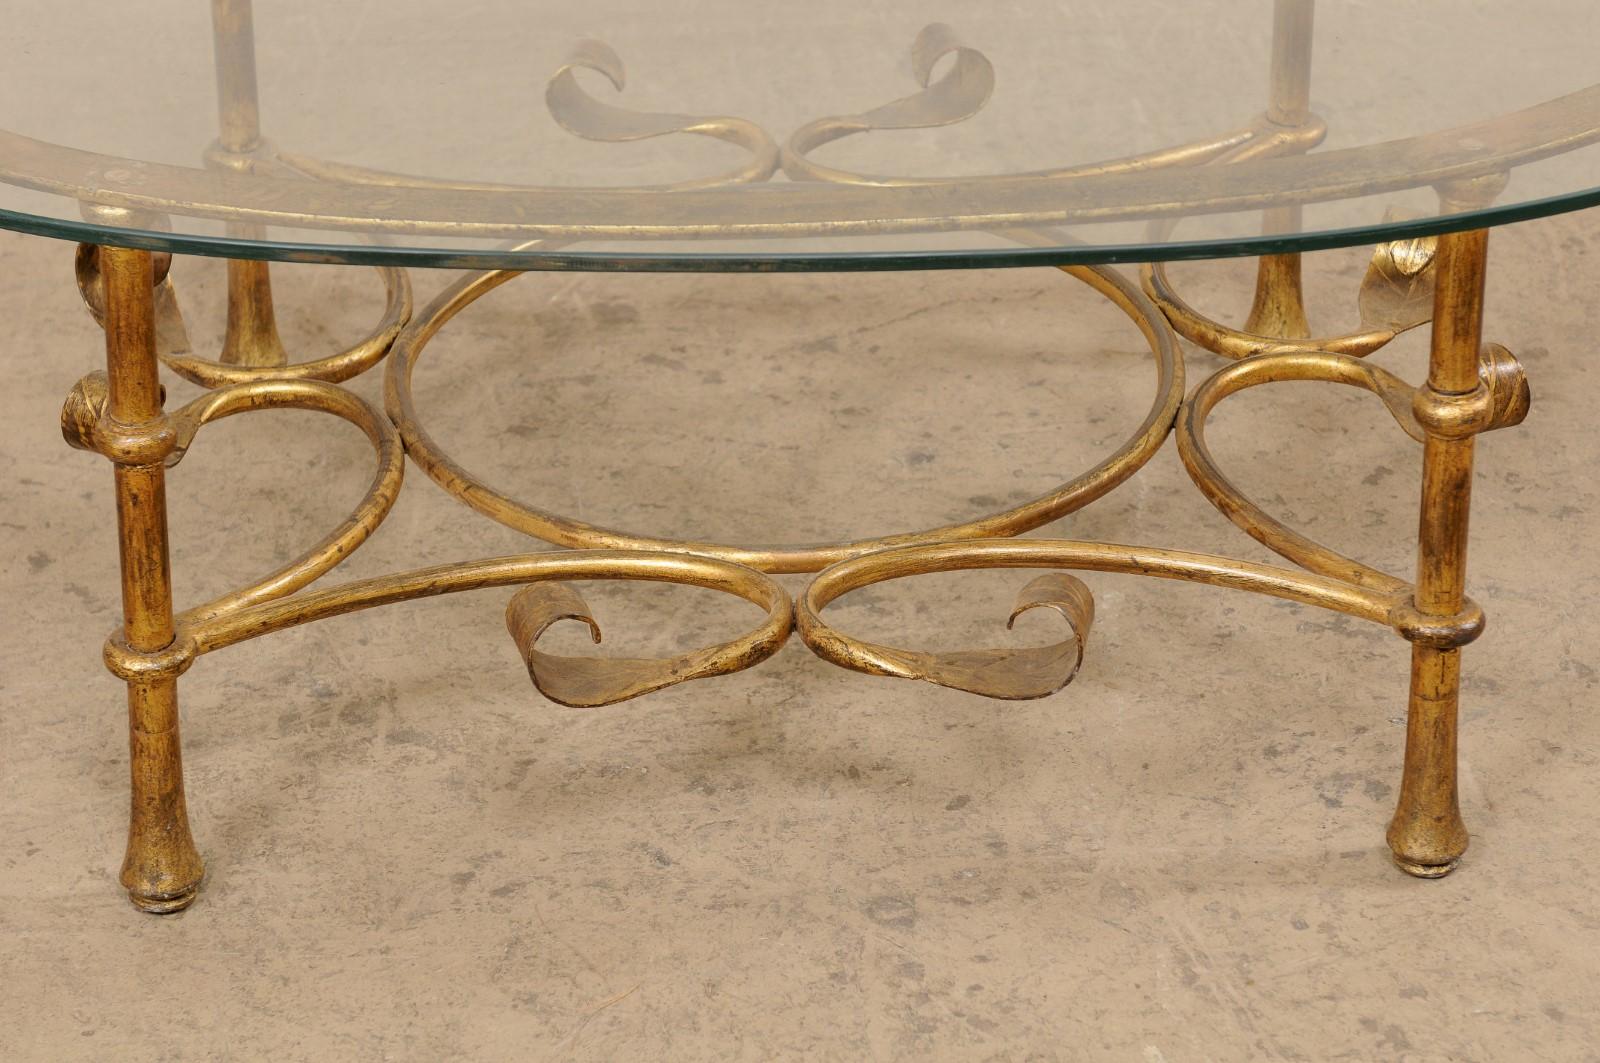 Spanish Oval Glass-Top Table with Iron Base (Gold Finish), Mid 20th C. 3